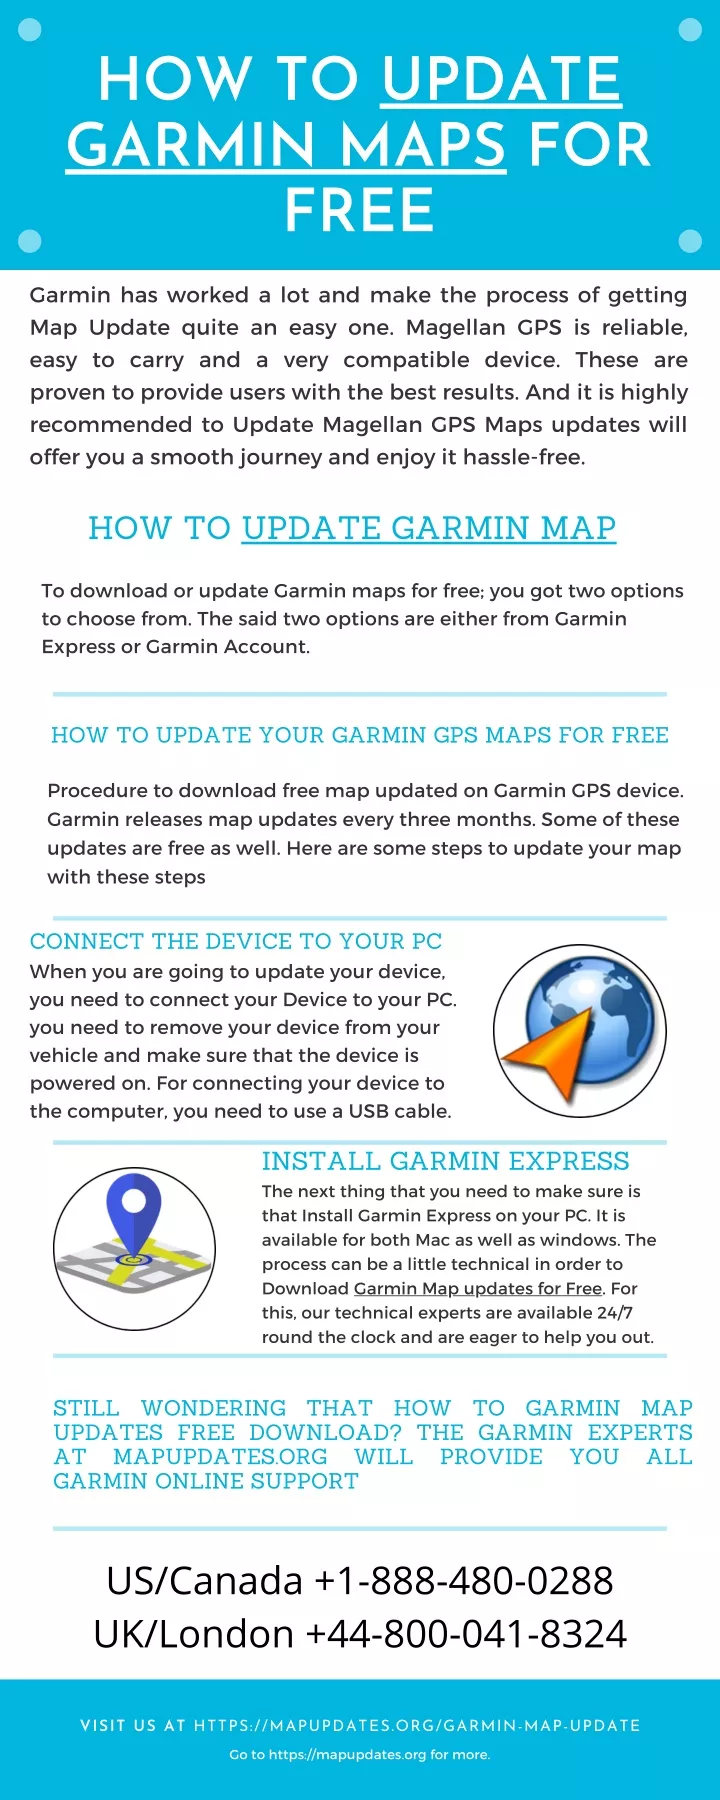 how to update garmin maps for free